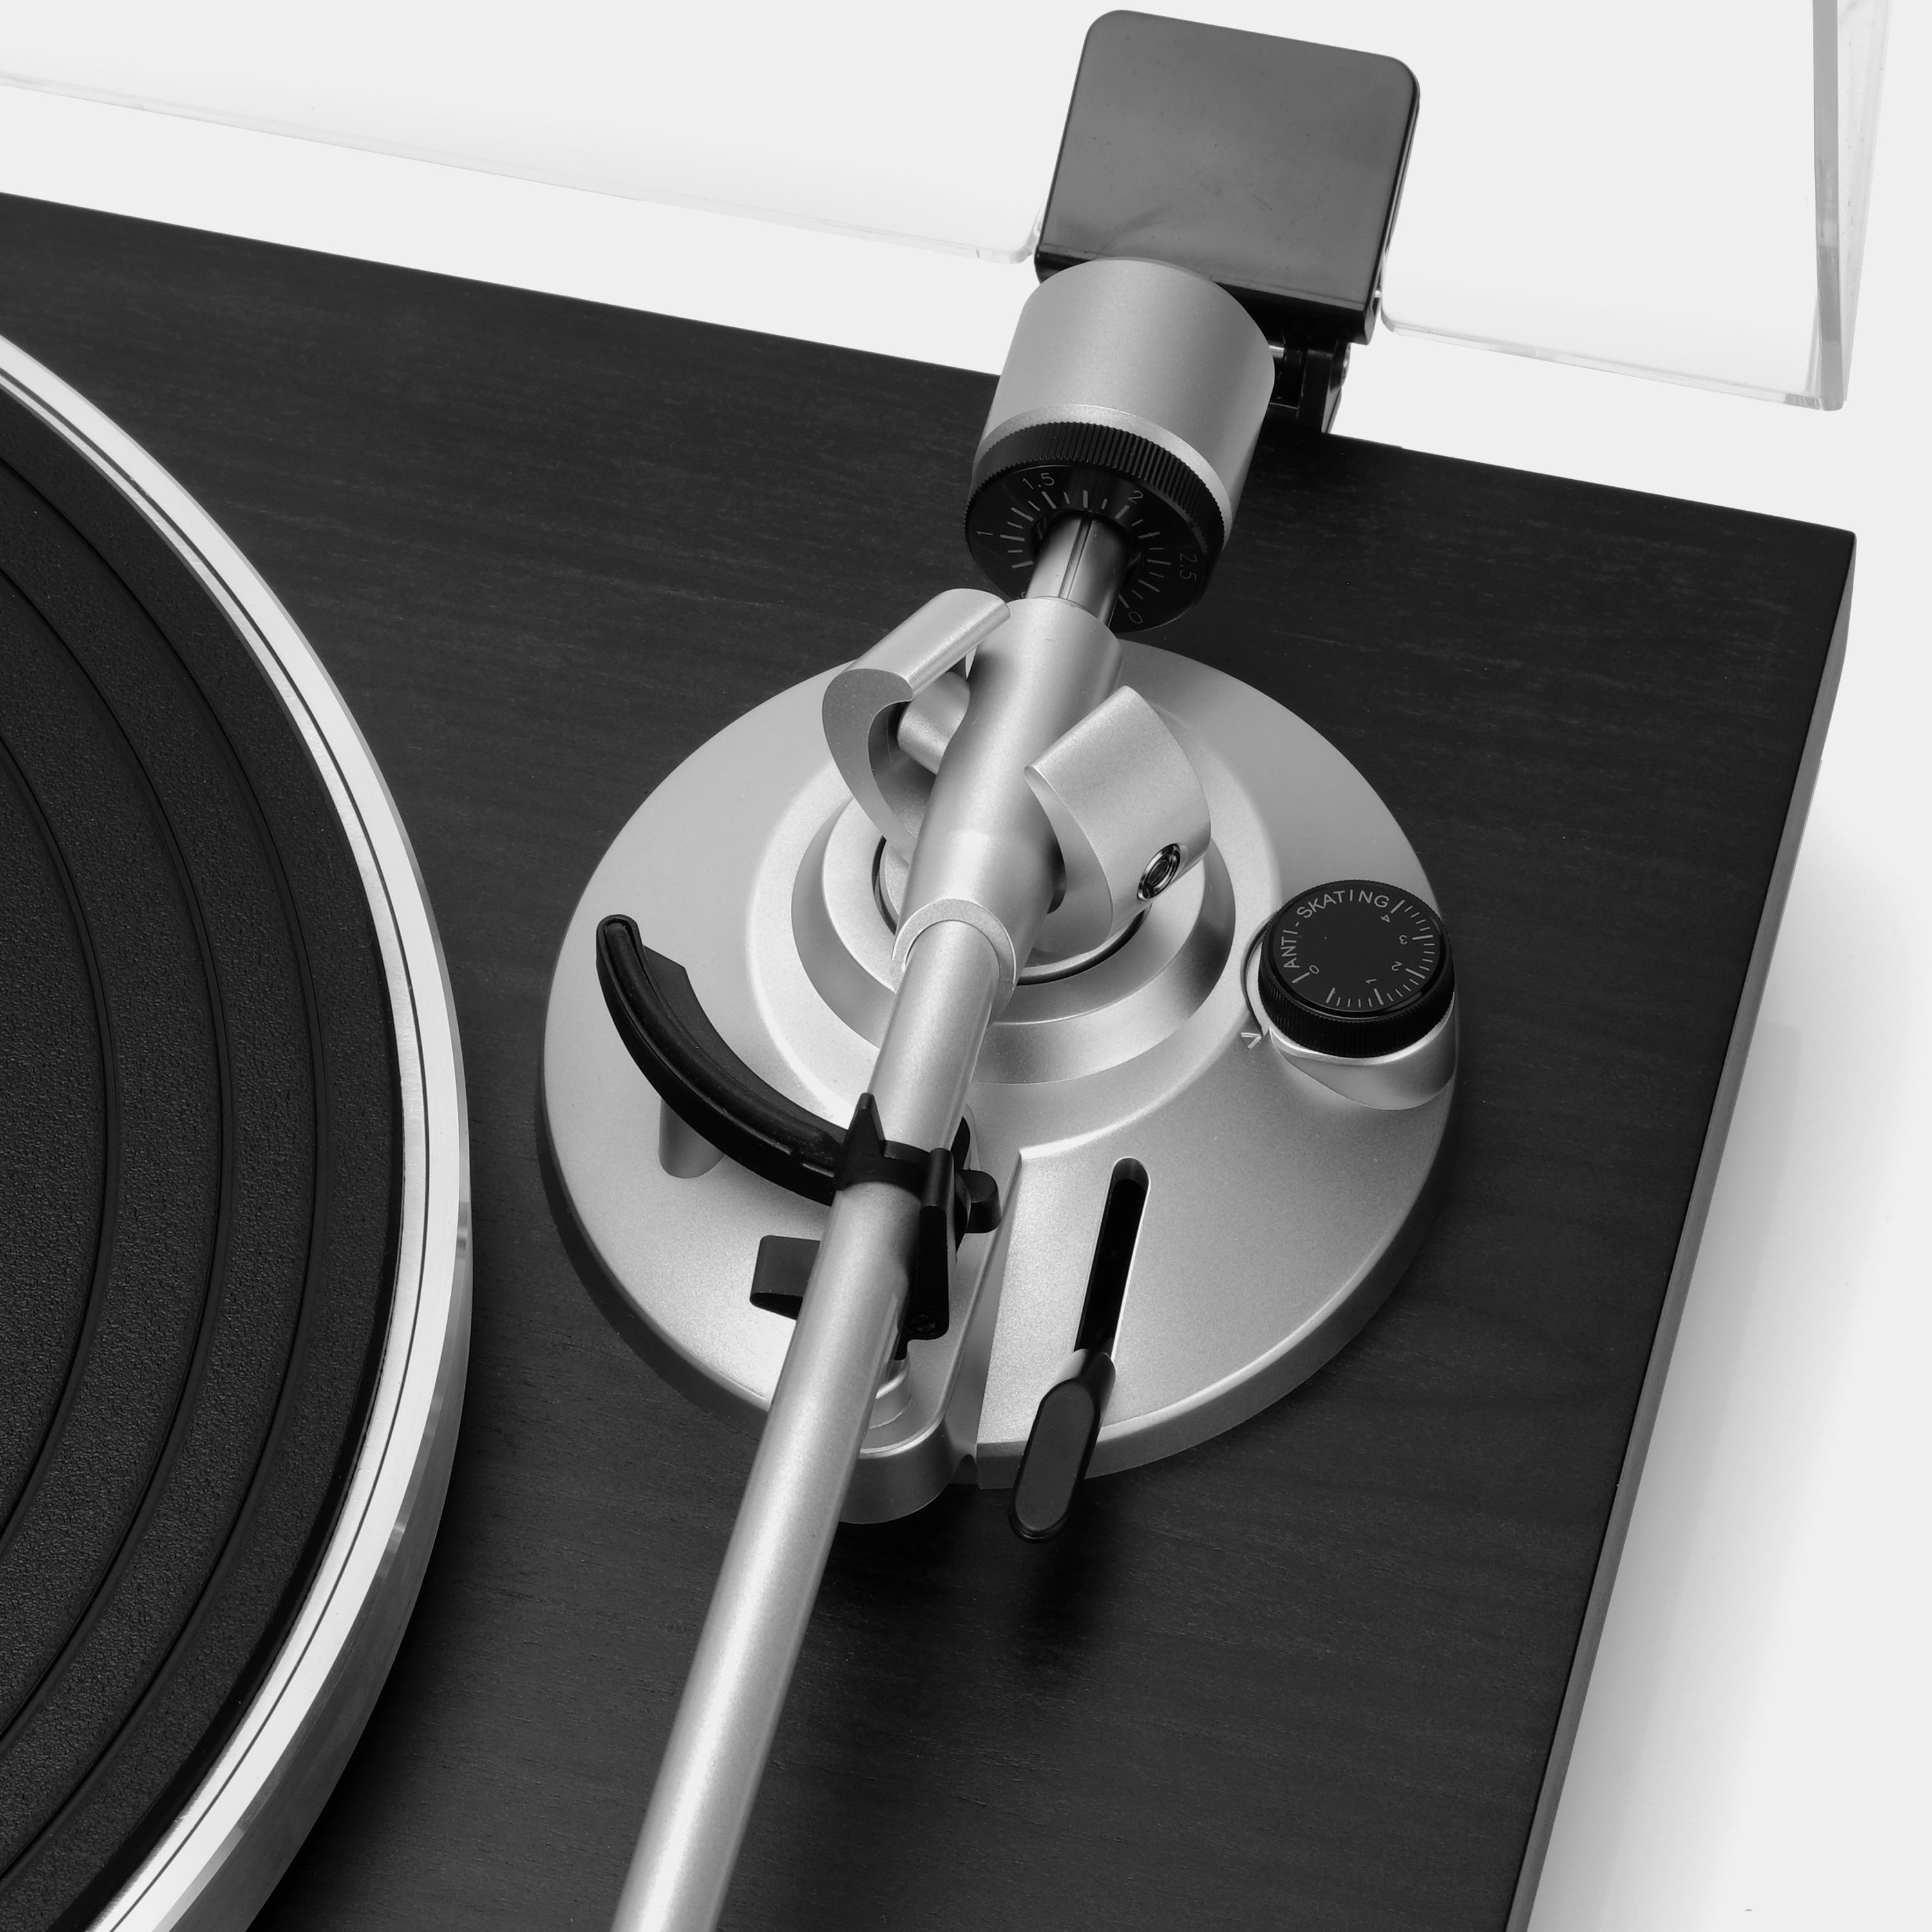 Audio Technica LP60 Anti Skate - All For Turntables